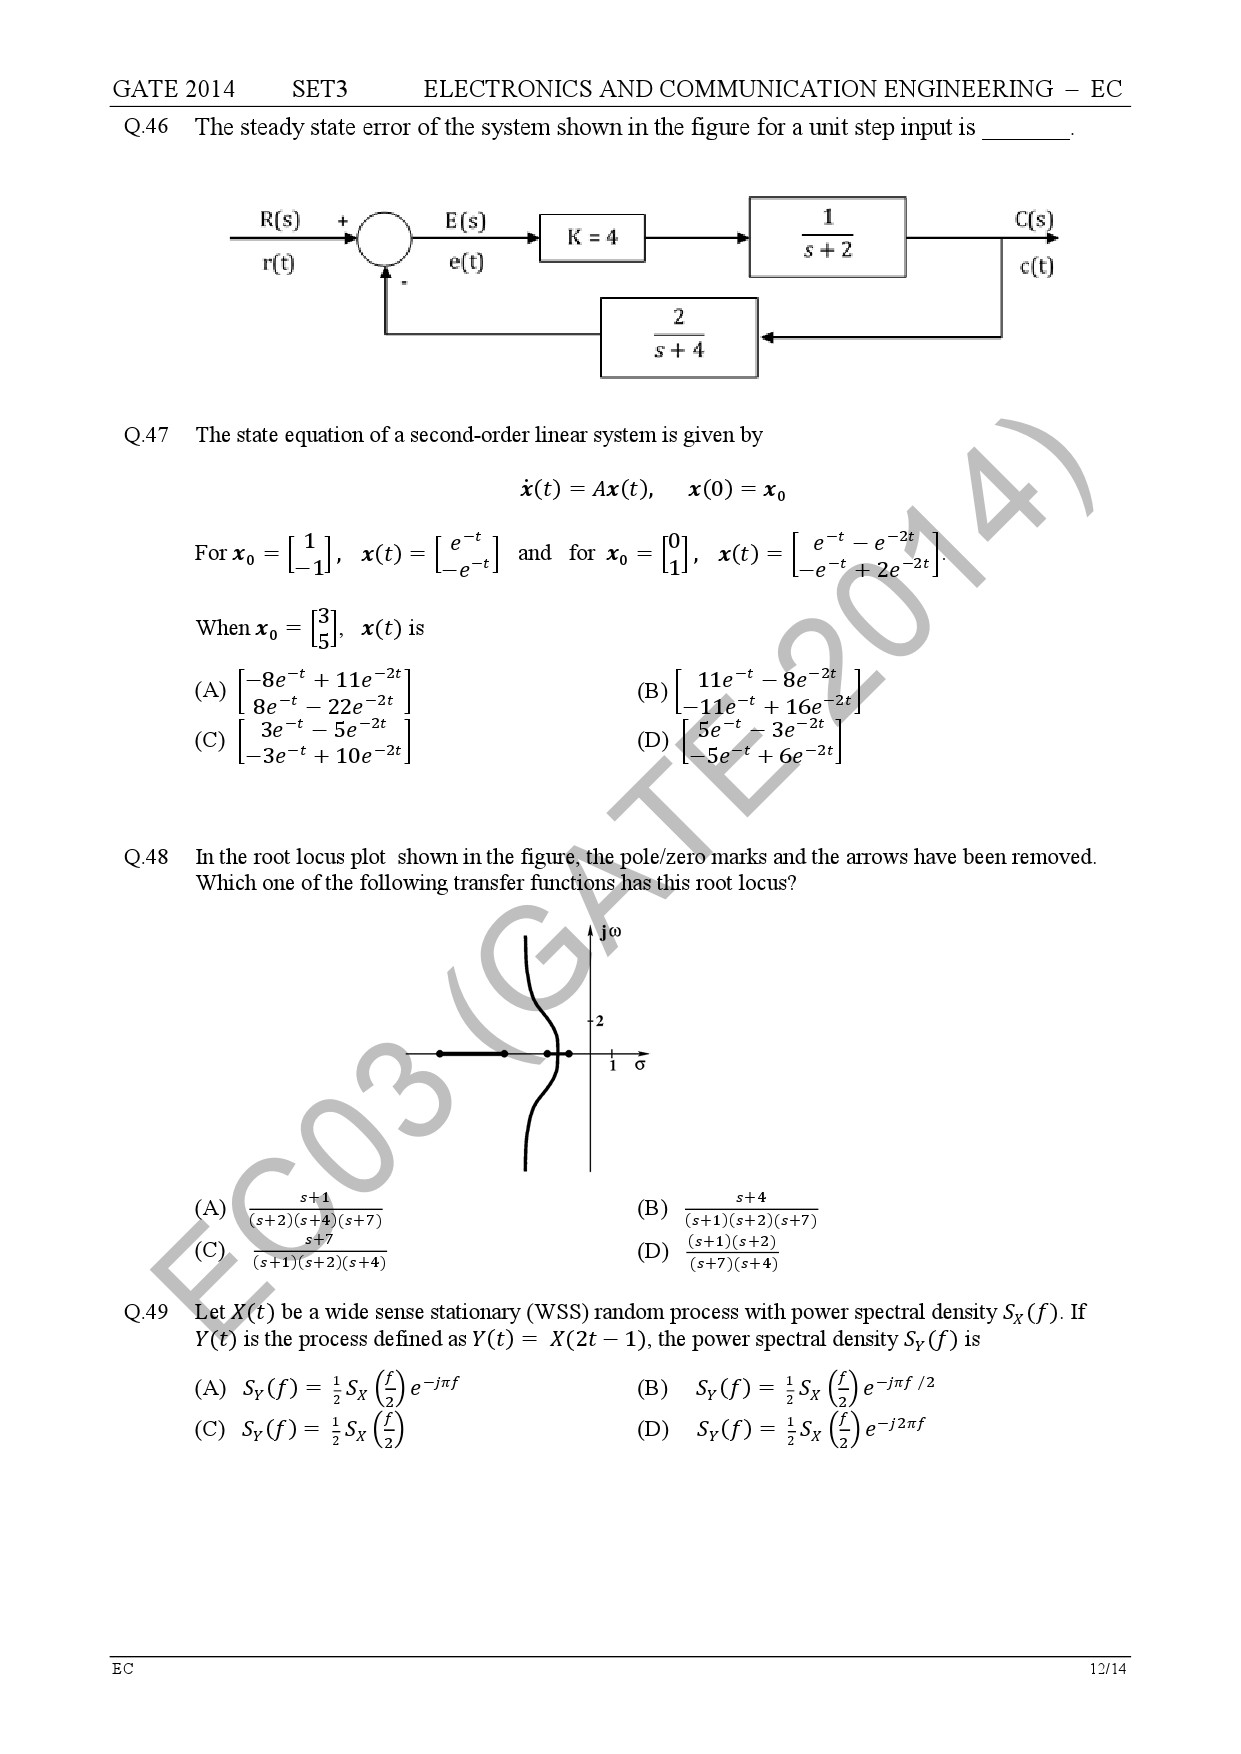 GATE Exam Question Paper 2014 Electronics and Communication Engineering Set 3 19